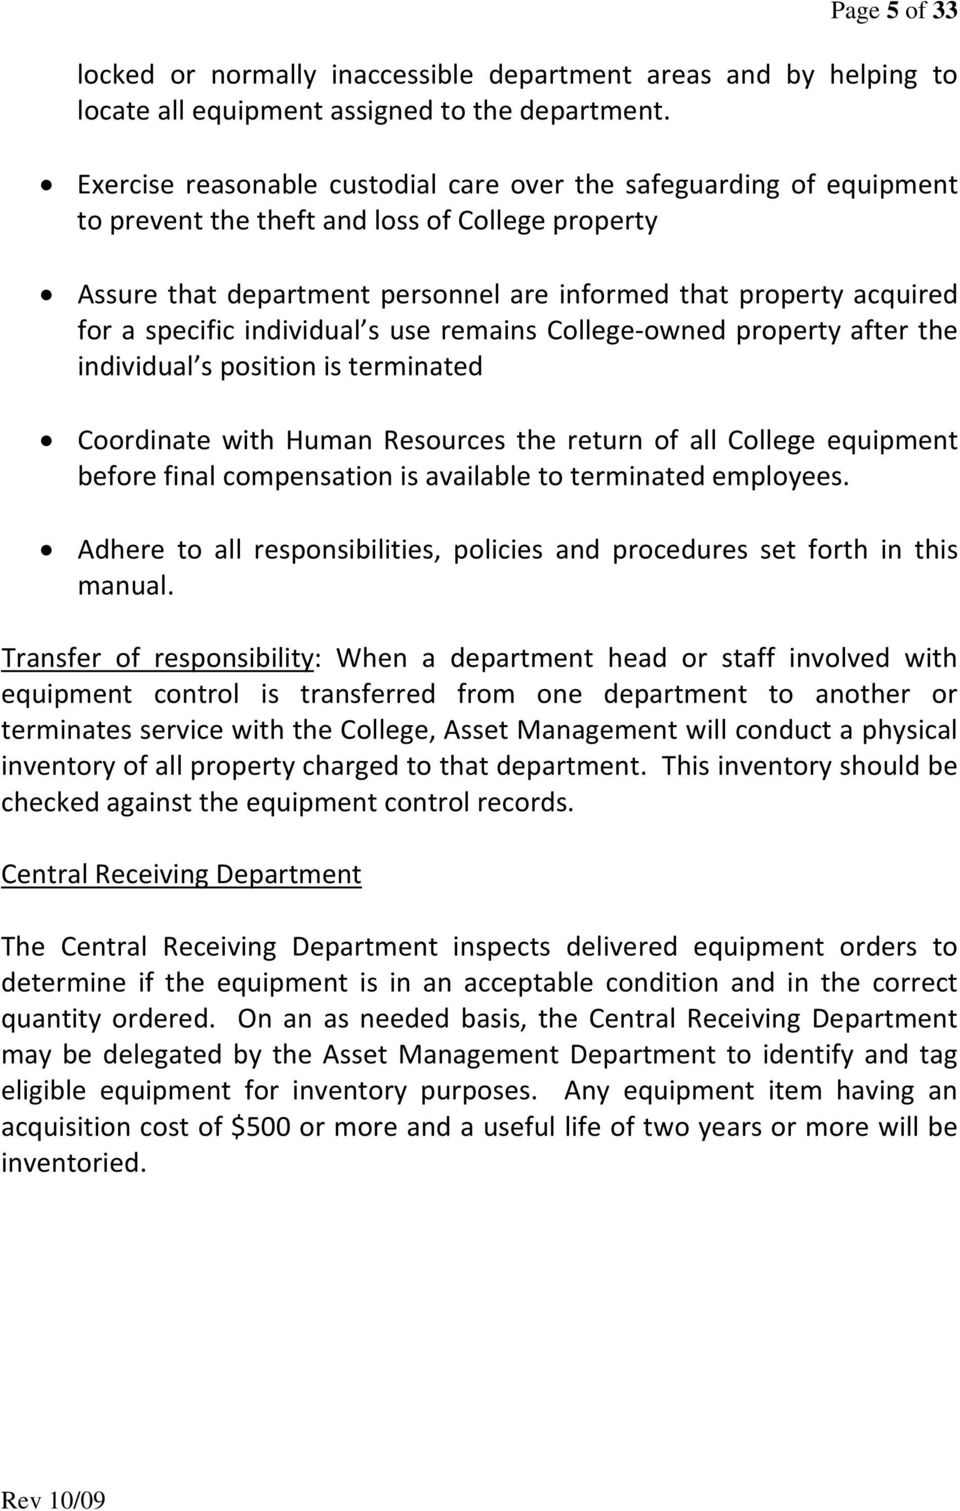 specific individual s use remains College owned property after the individual s position is terminated Coordinate with Human Resources the return of all College equipment before final compensation is